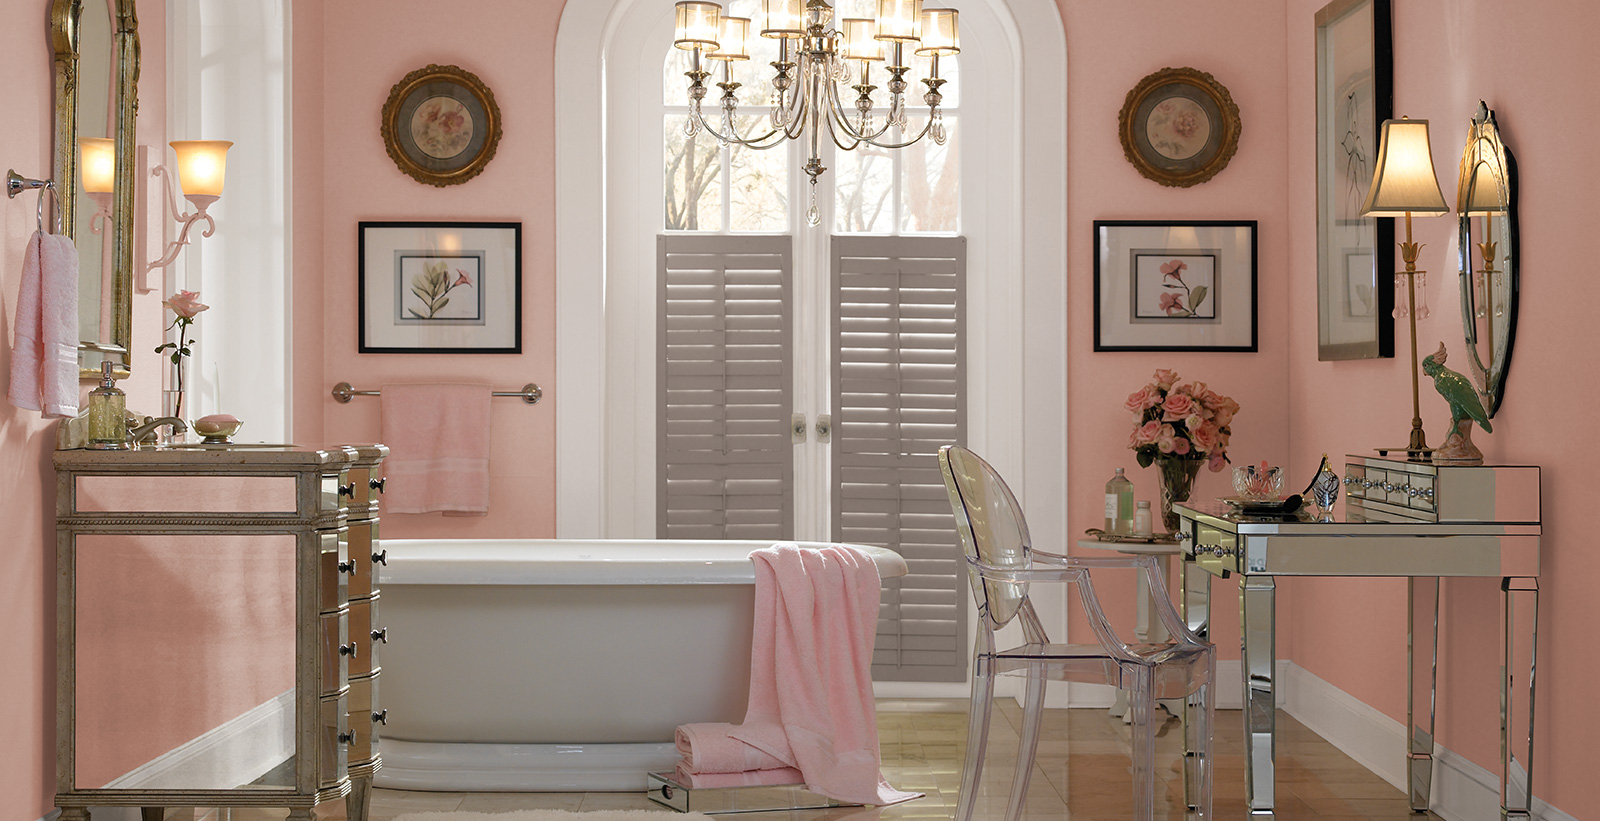 Classic styled, glamour bathroom with pink walls, white trim, brown shutters, vintage vanity and mirror.